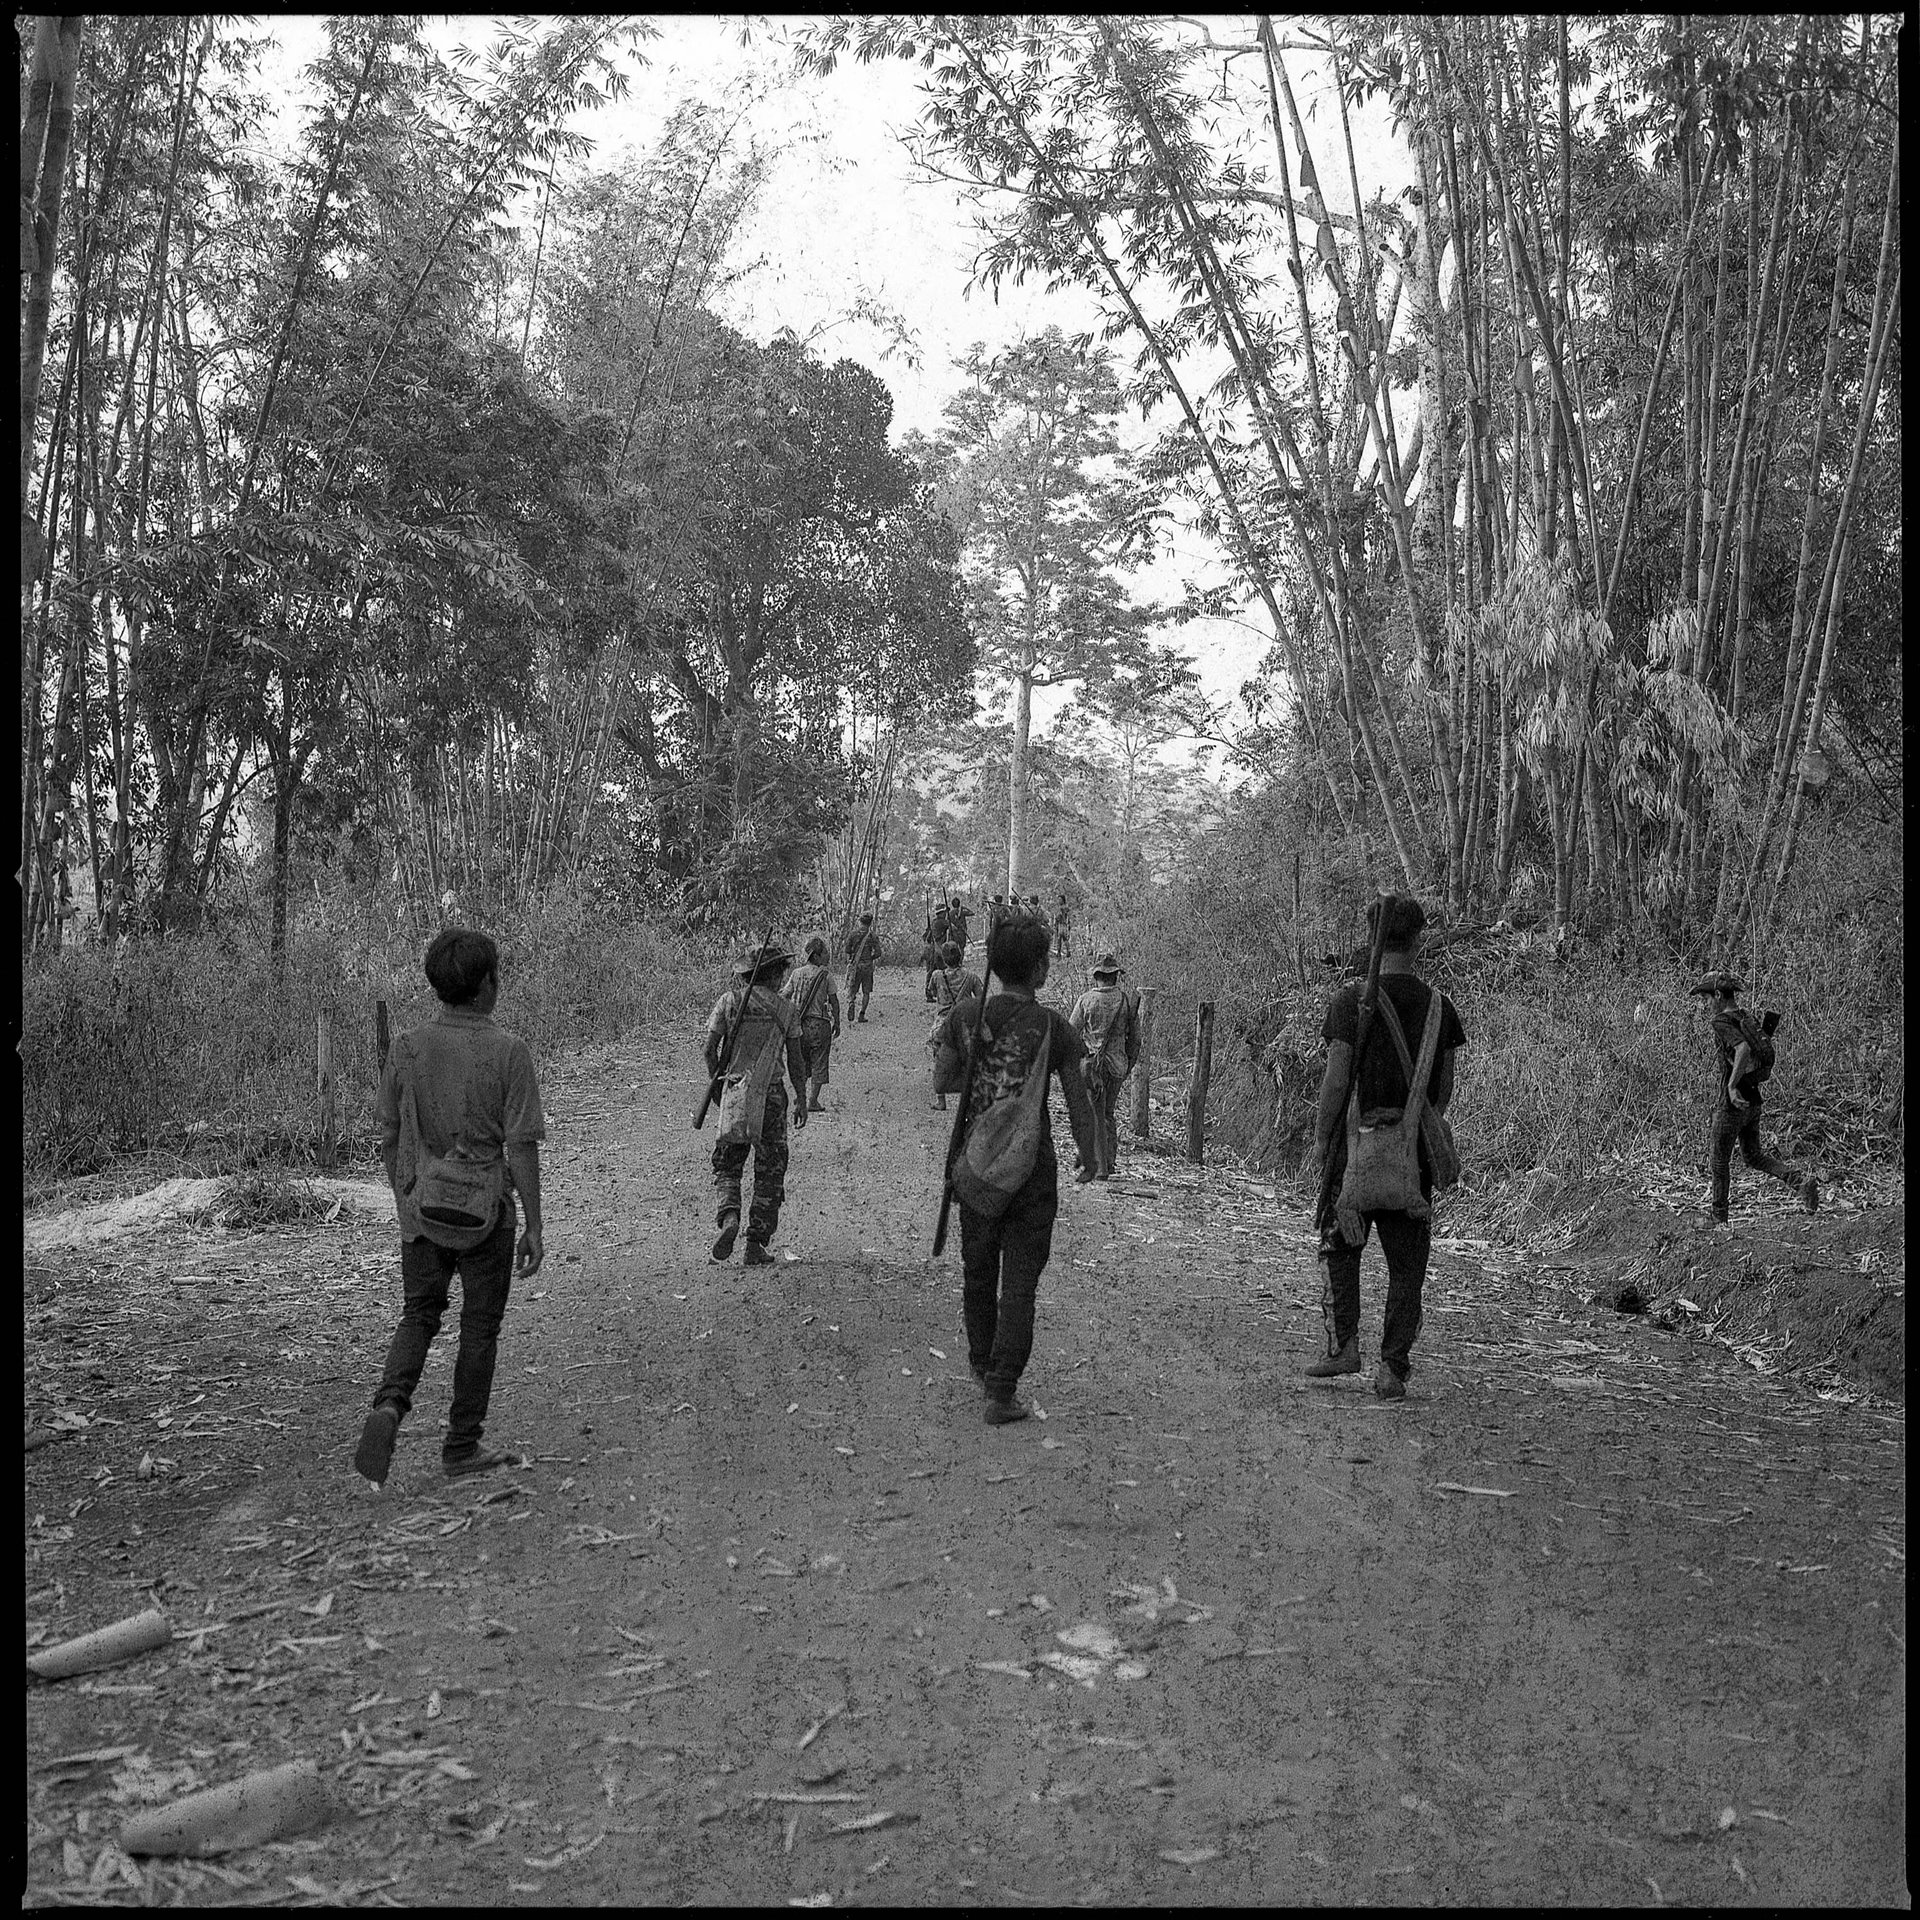 Villagers carrying homemade hunting rifles return from tactical training in Hpruso township, Kayah (Karenni) State, Myanmar. Around the country, citizens had joined People&rsquo;s Defense Forces in armed opposition to military rule.